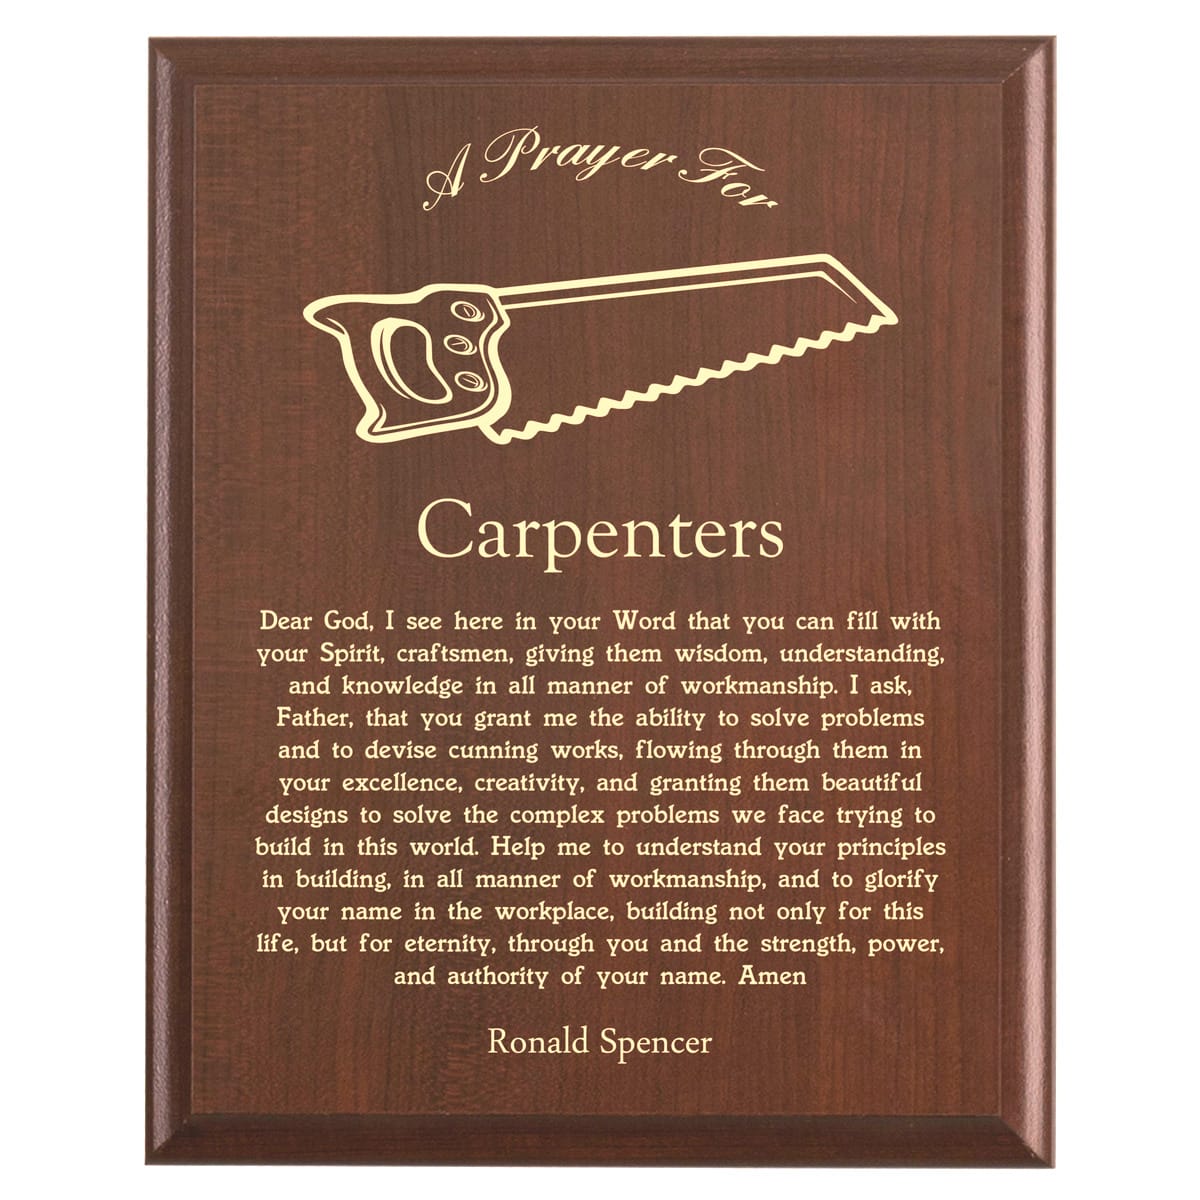 Plaque photo: Carpenters  Prayer Plaque design with free personalization. Wood style finish with customized text.